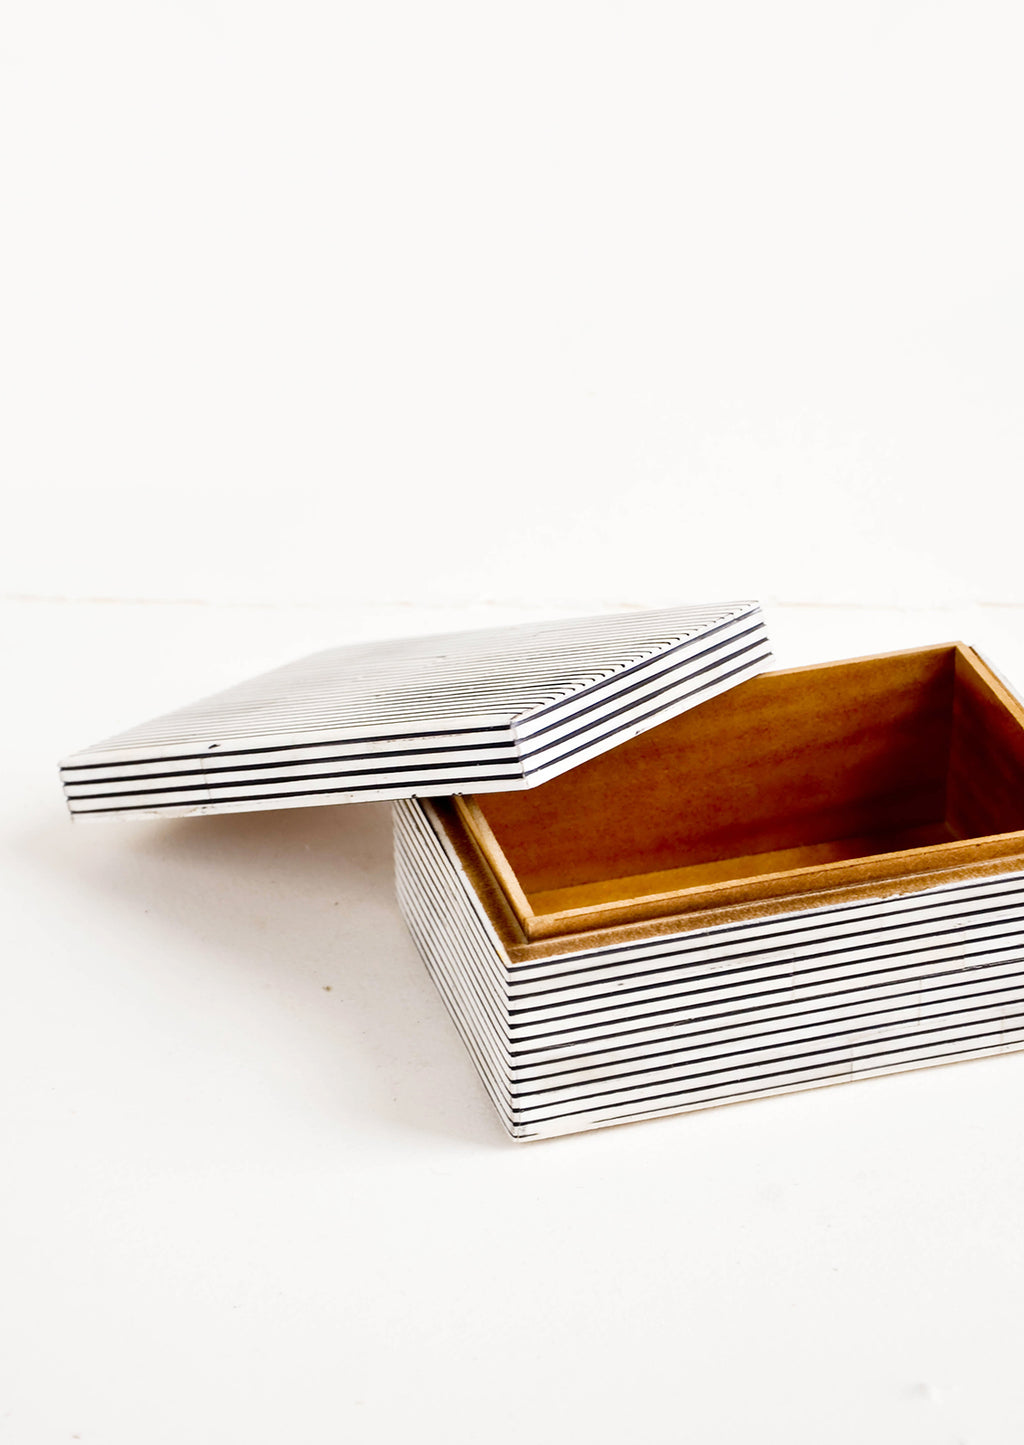 2: Small lidded storage box with wooden lining